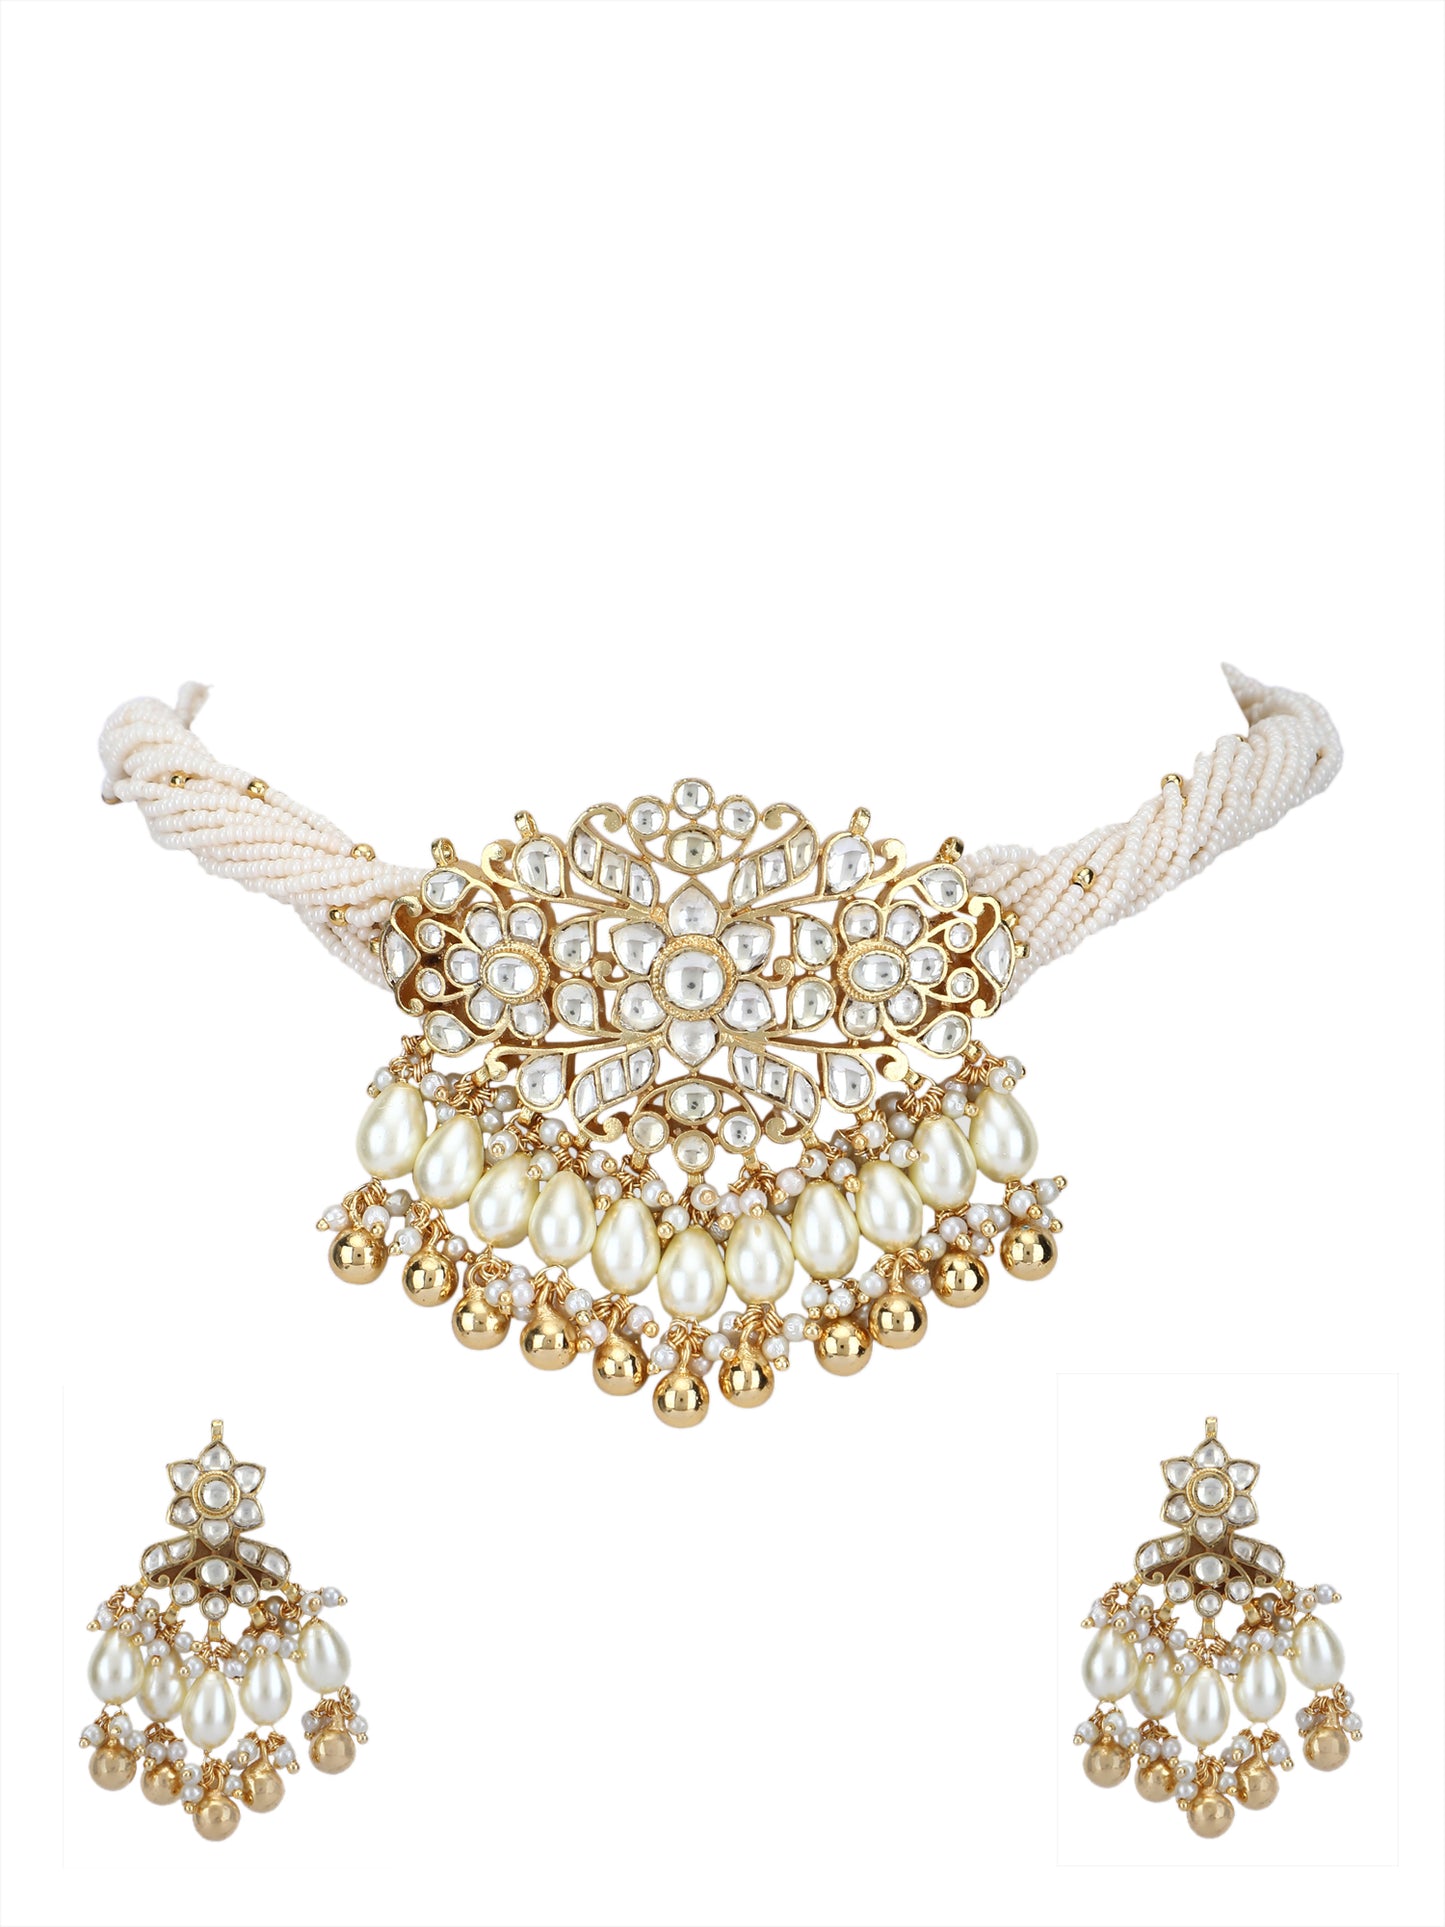 22KT Gold Plated Kundan Classic Gold Choker Necklace Set for women and Girls